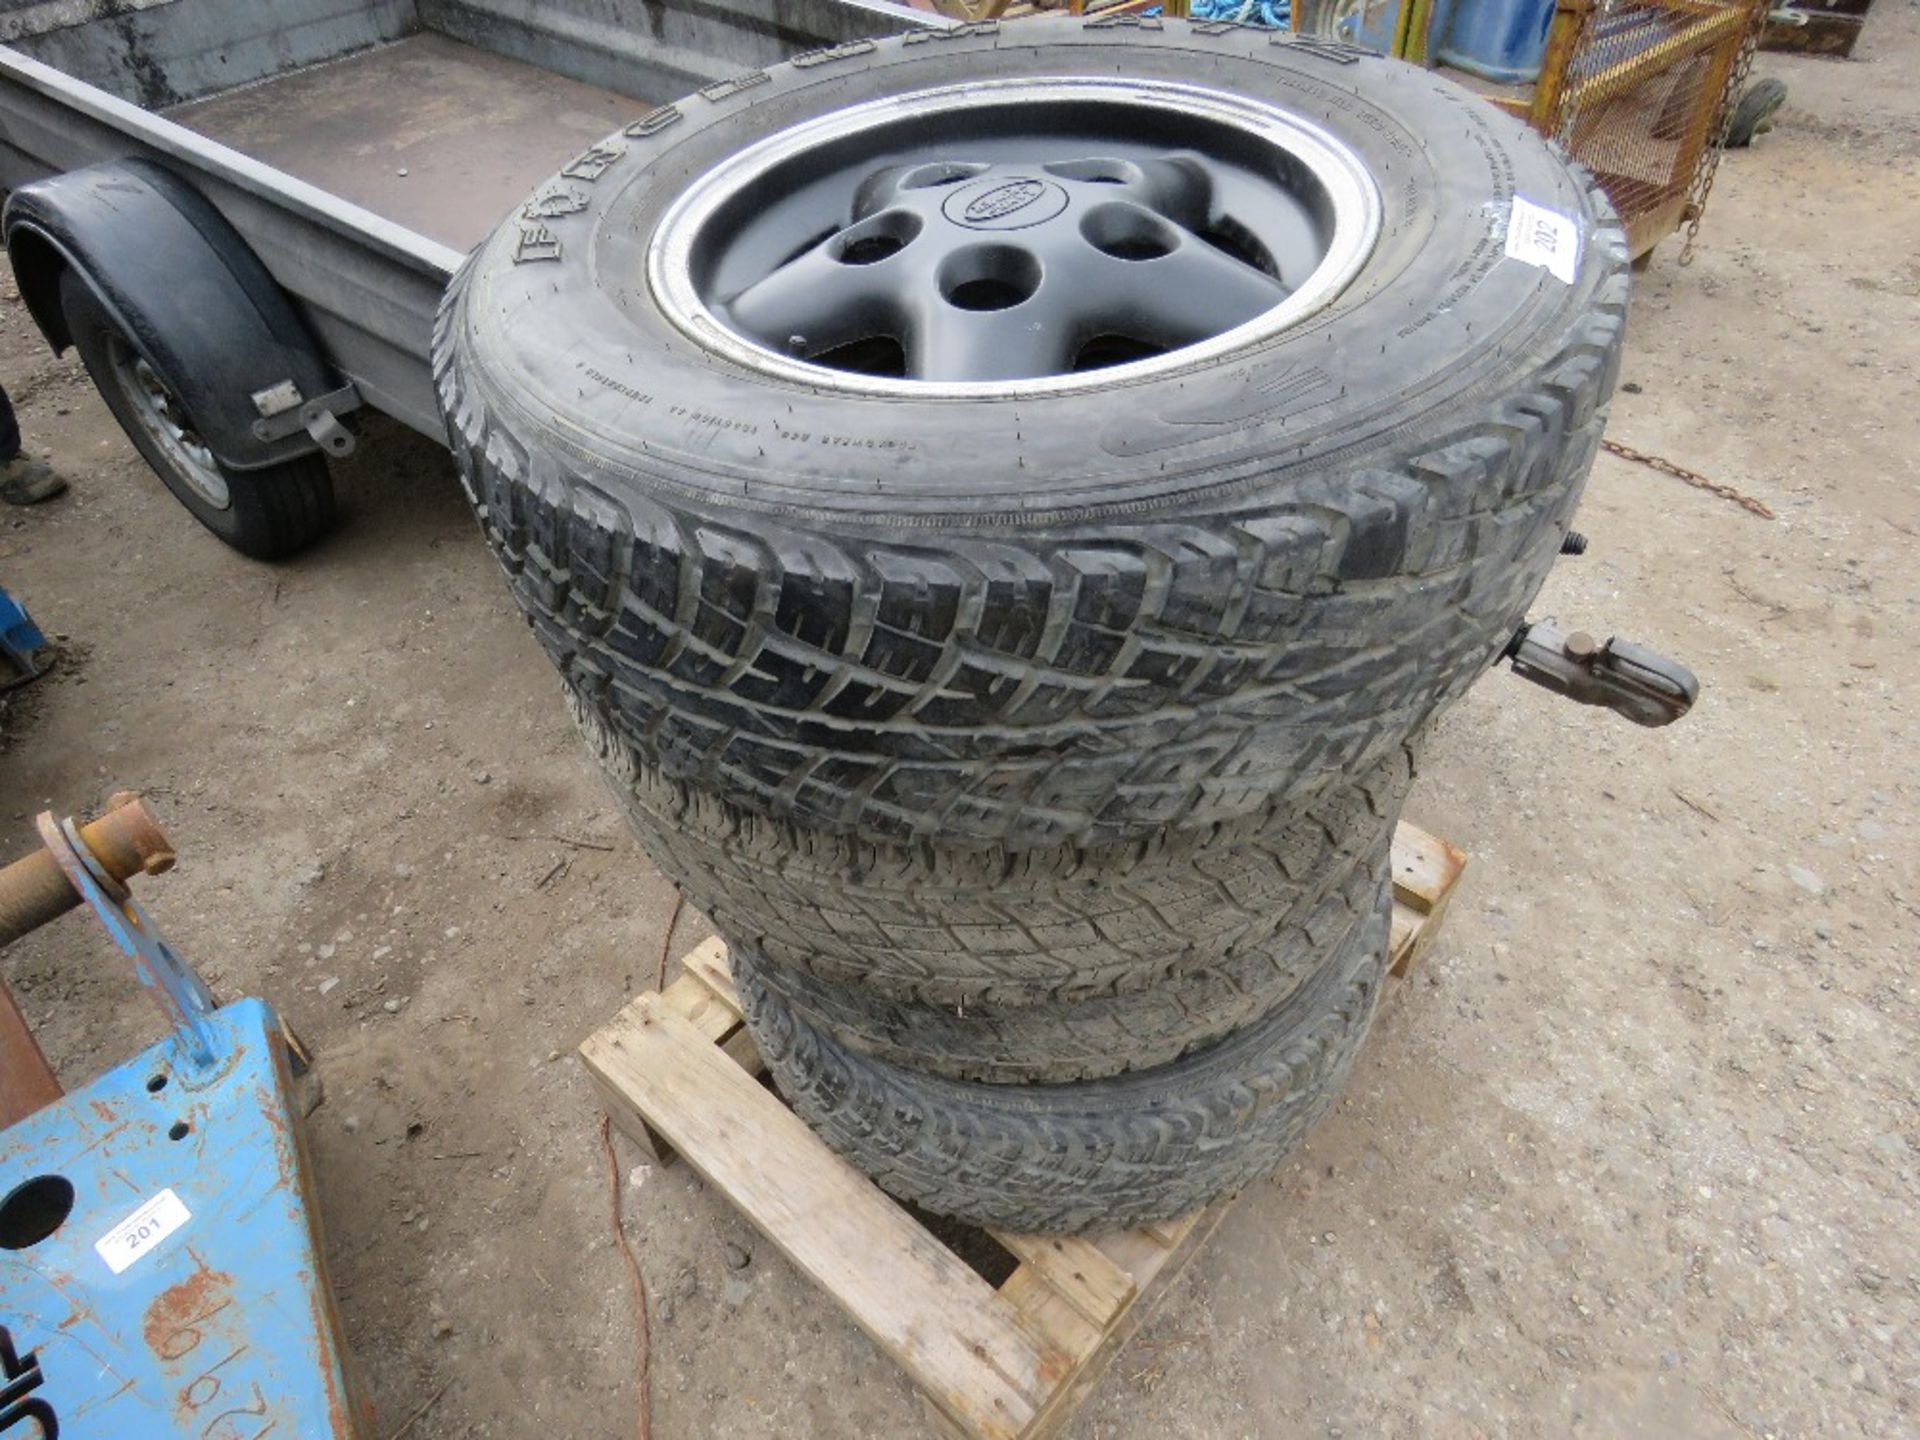 4 X LANDROVER ALLOY WHEELS AND TYRES 235/70R16 SIZE